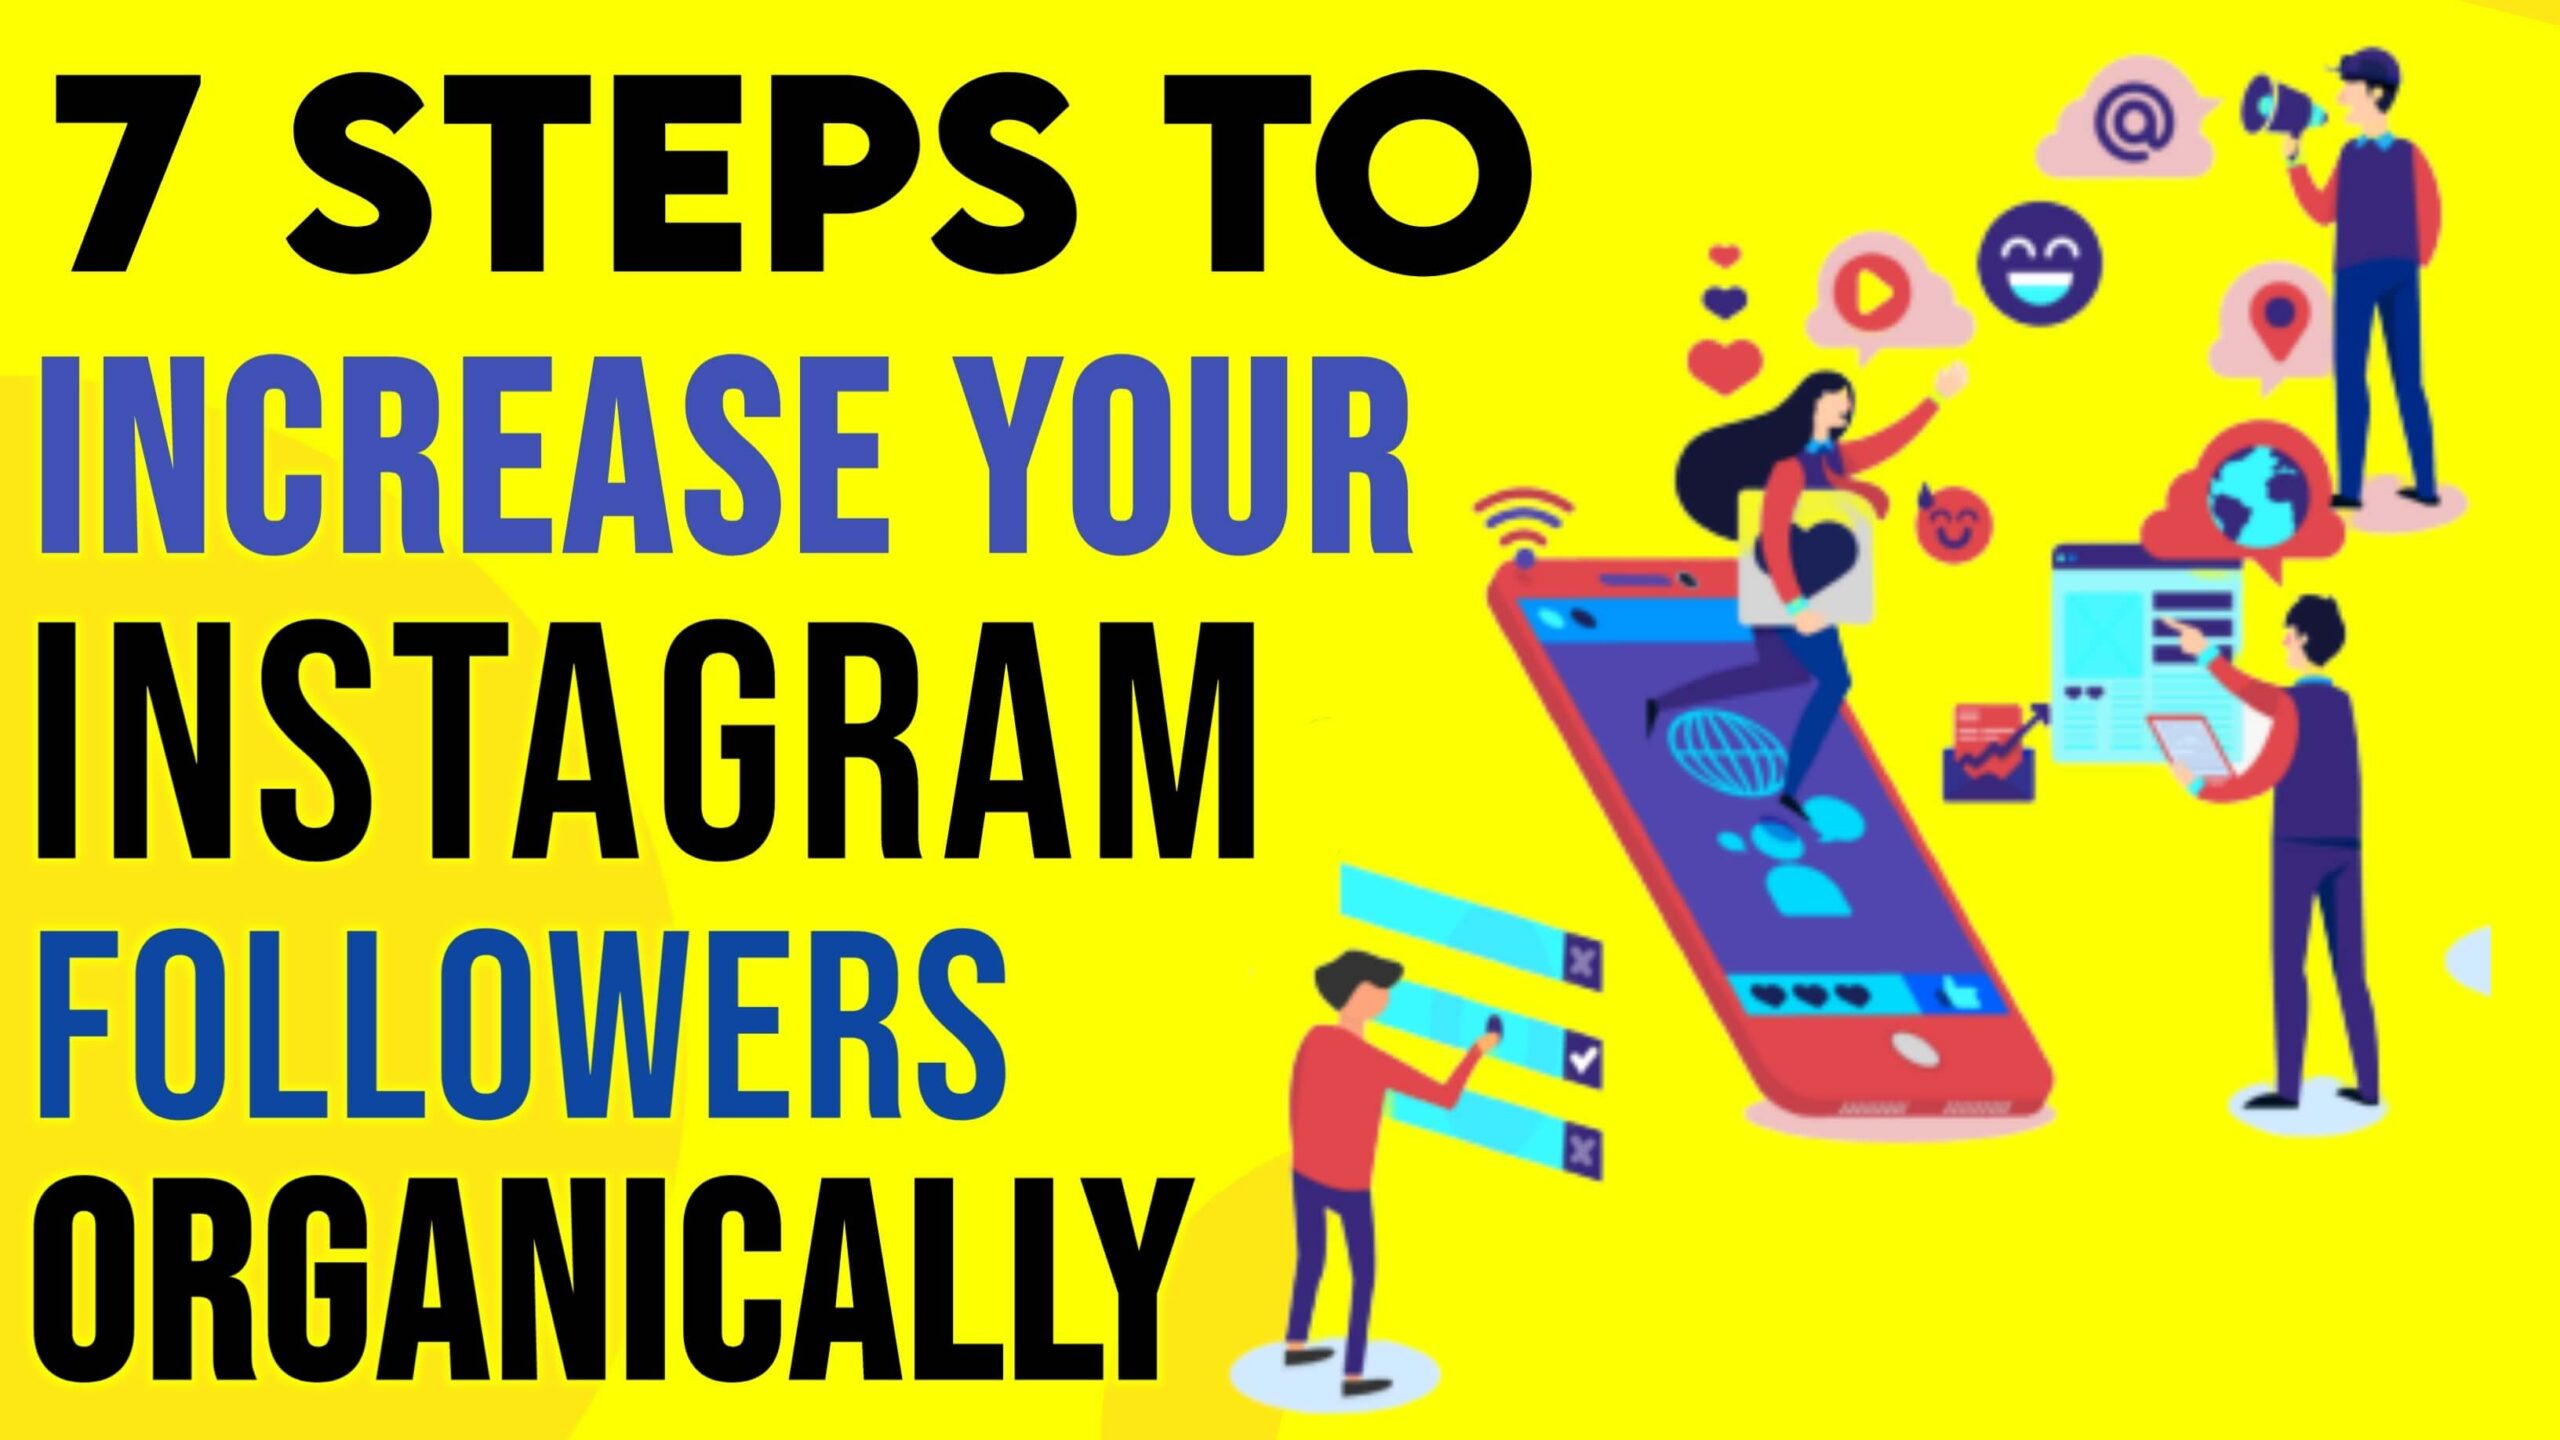 7 Steps to Organically Increase Your Instagram Followers